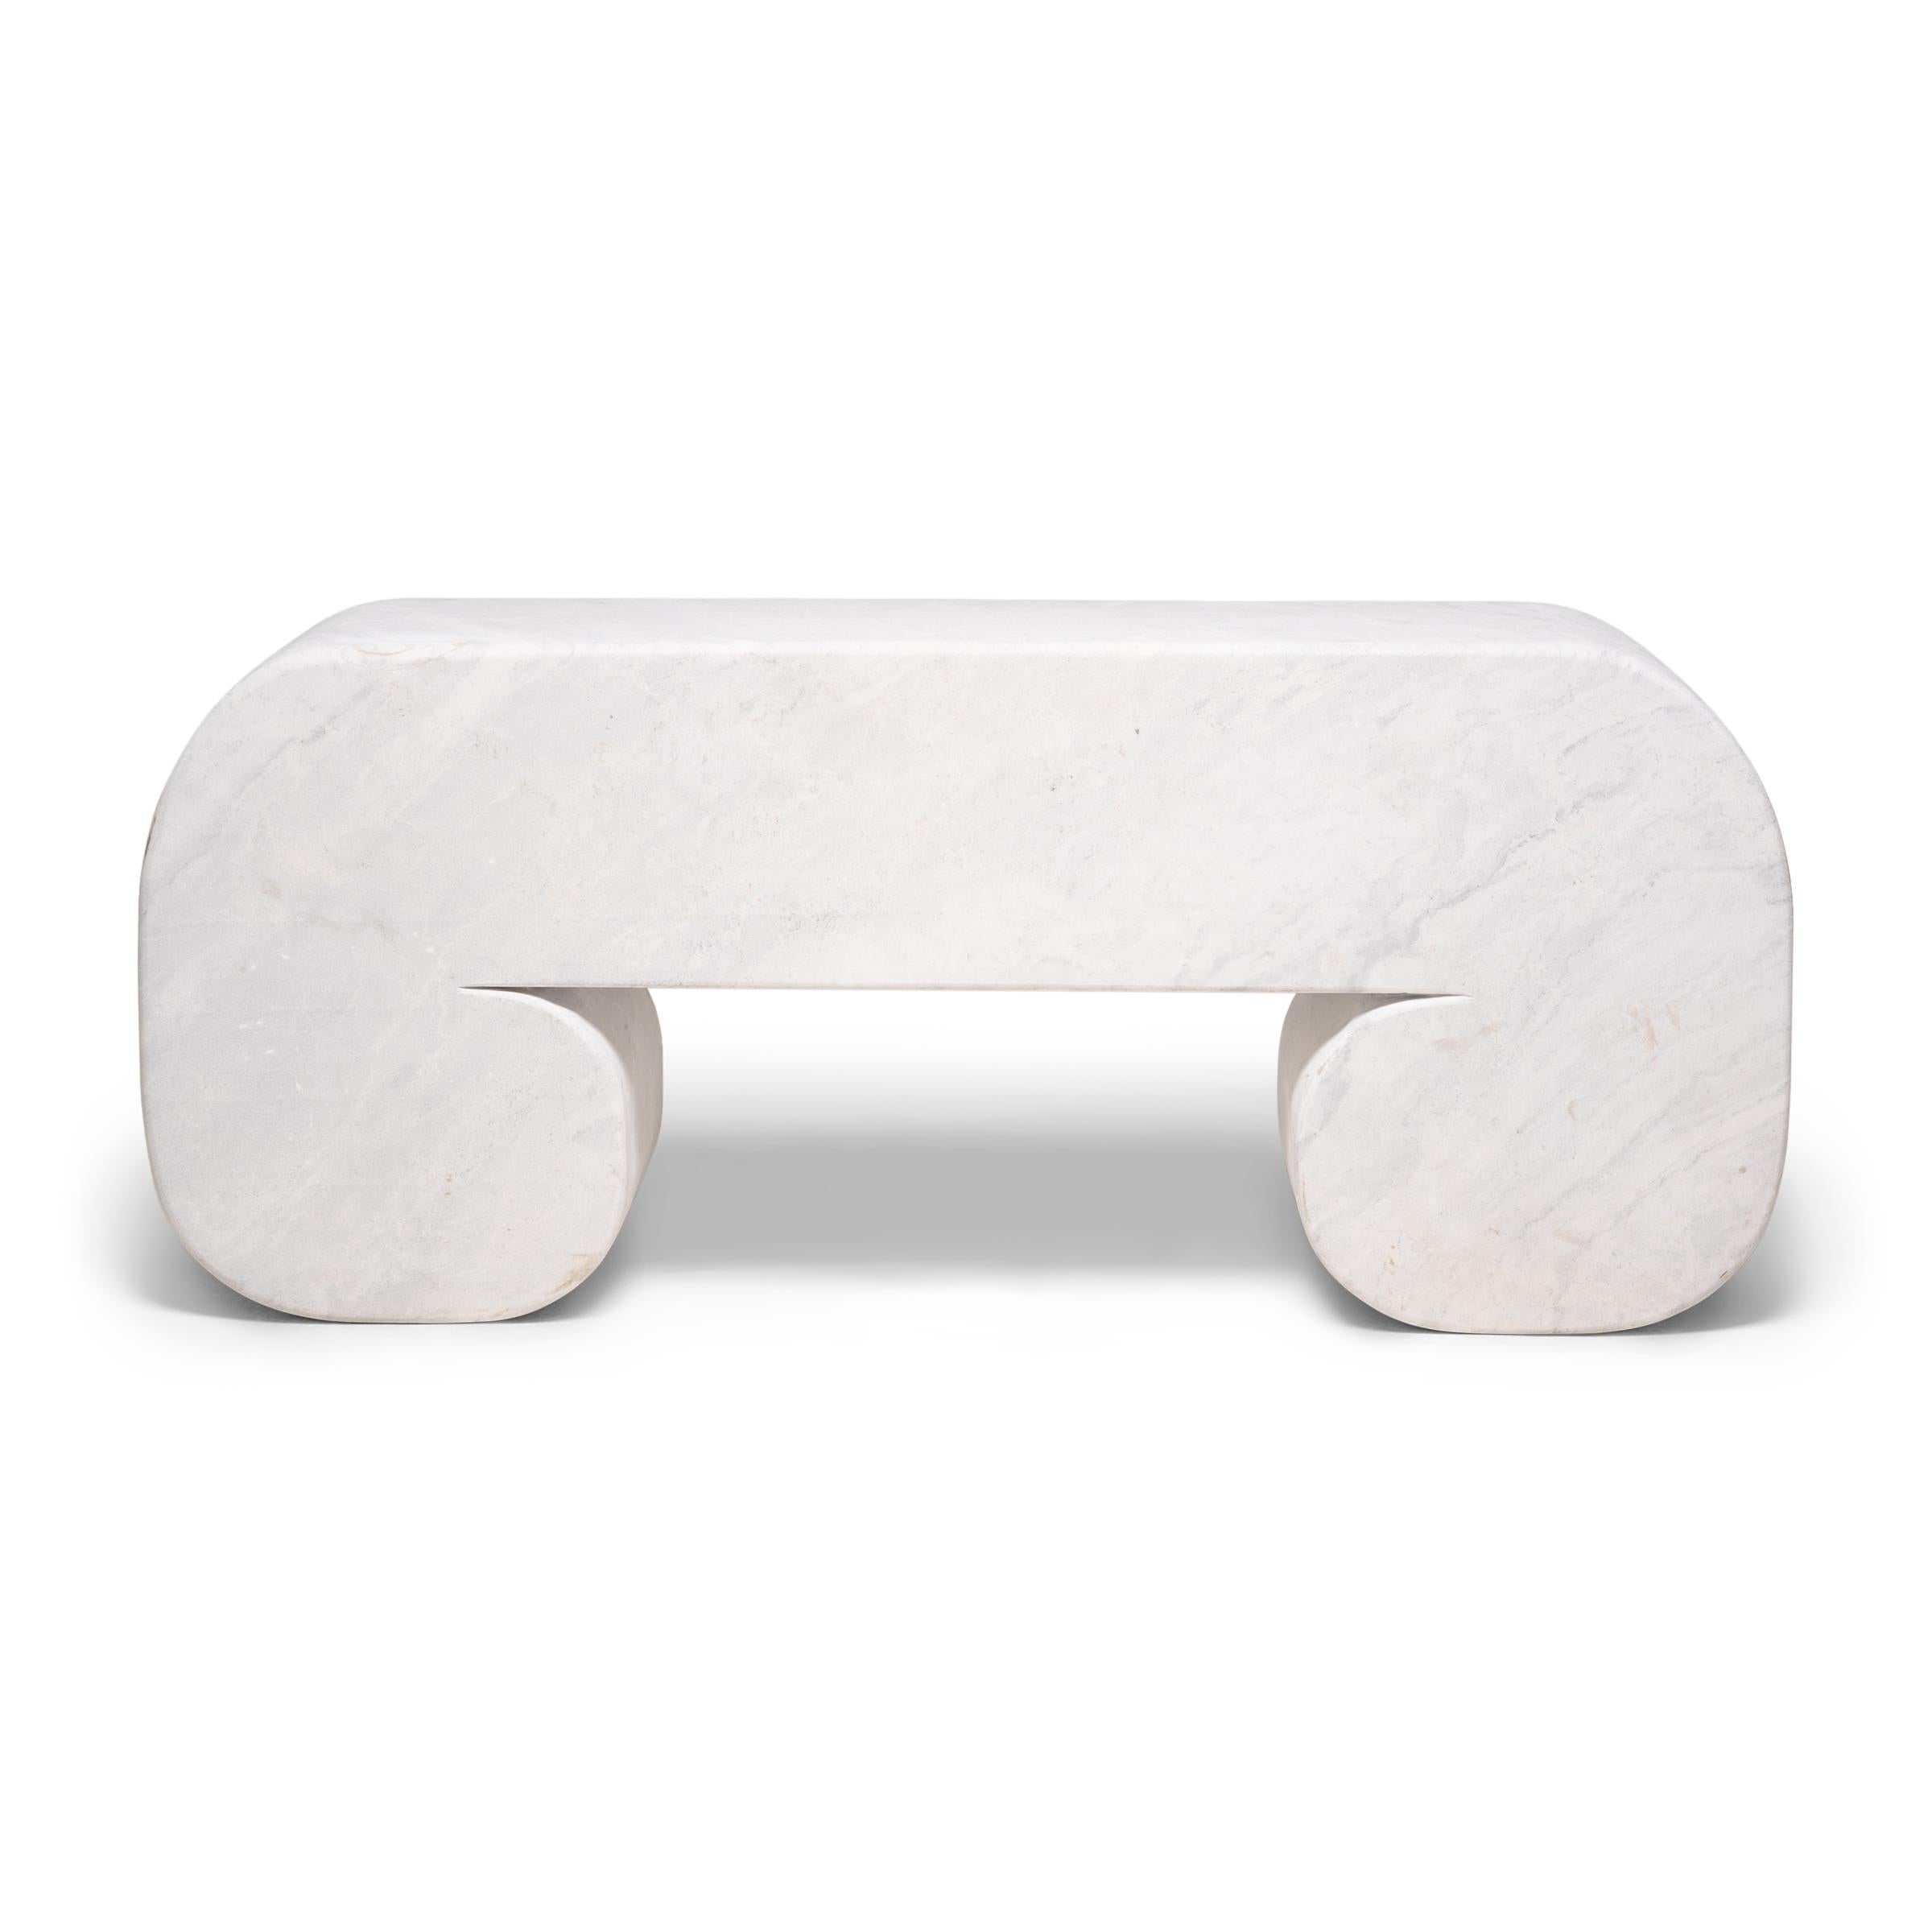 This gorgeous white marble bench is sculpted to resemble a traditional scroll table, defined by rounded corners that curve under to form cloud-like scroll feet. The minimalist bench was carved by hand from a solid block of Dali marble, an